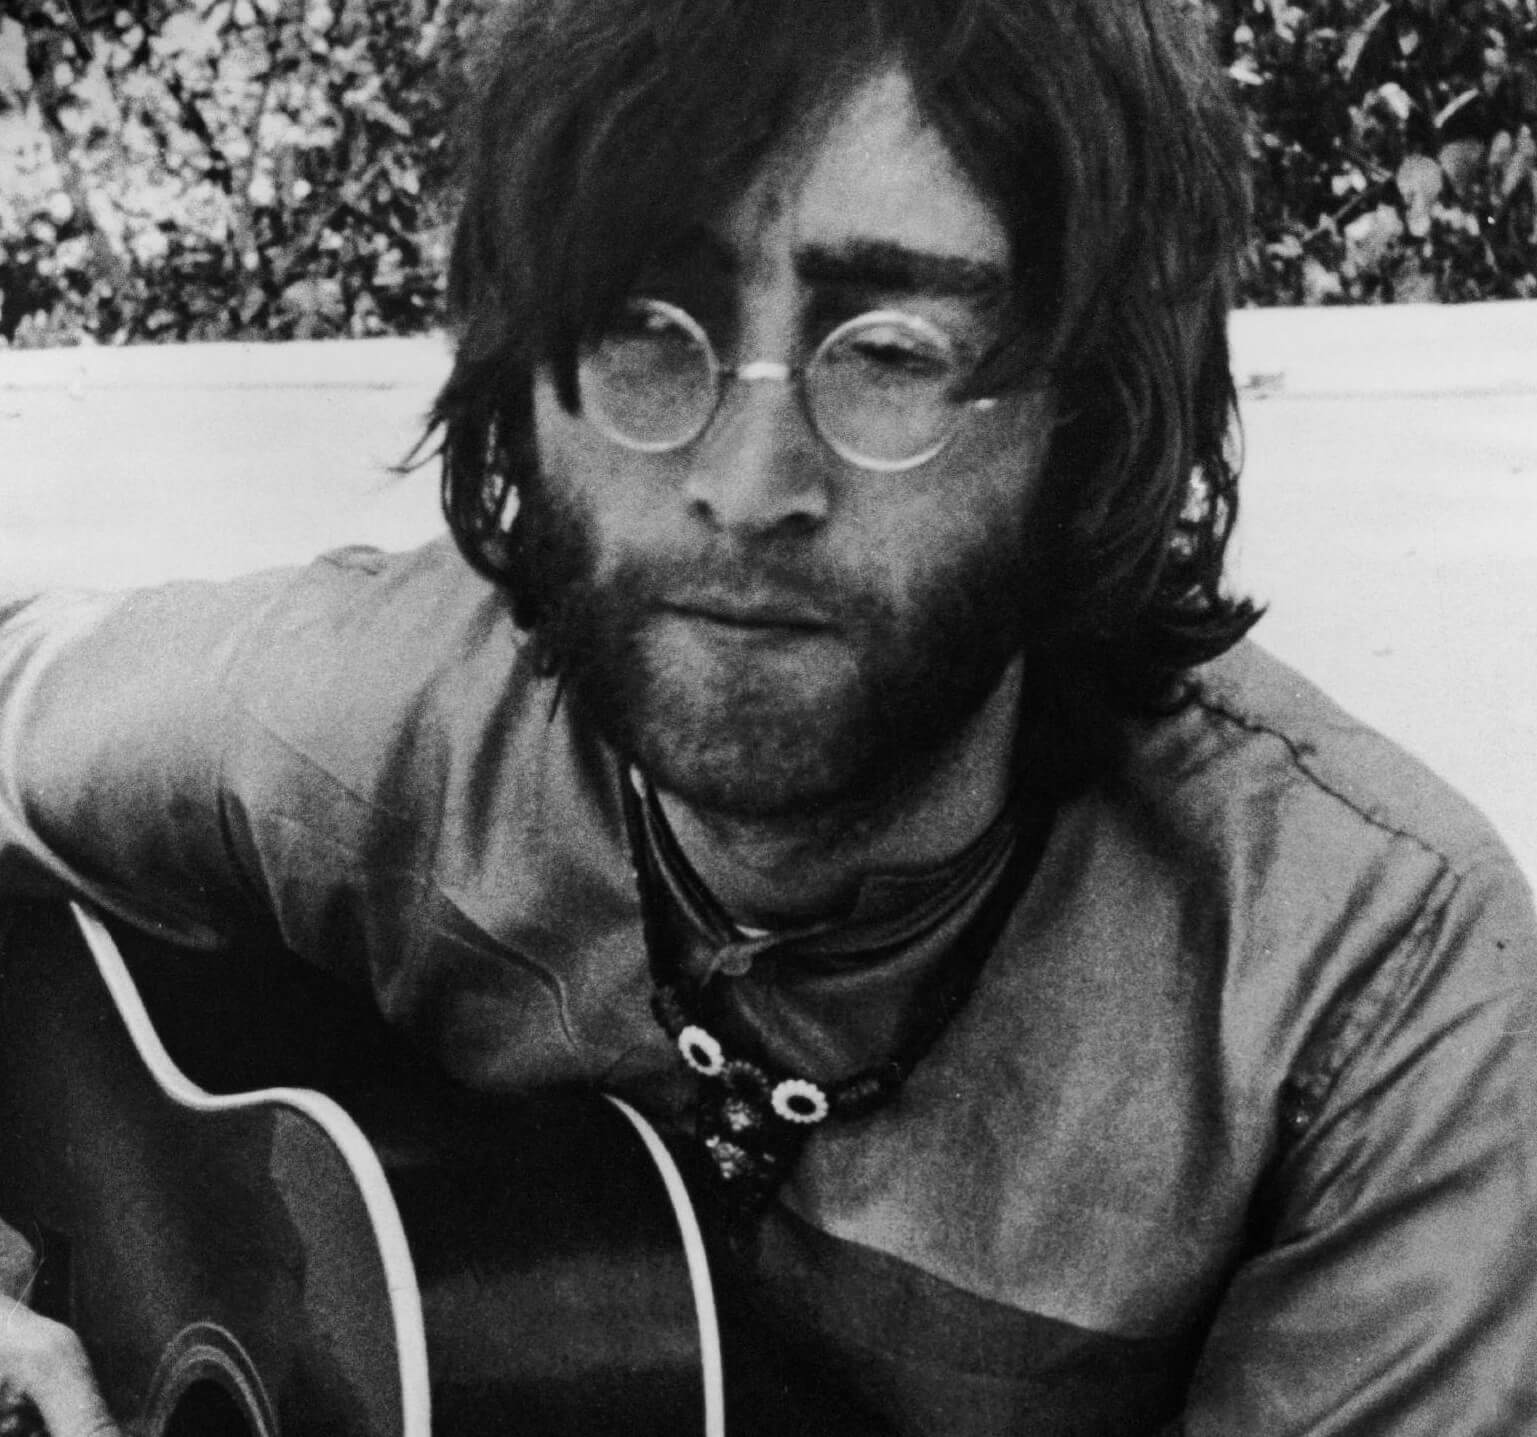 "Power to the People" singer John Lennon with a beard